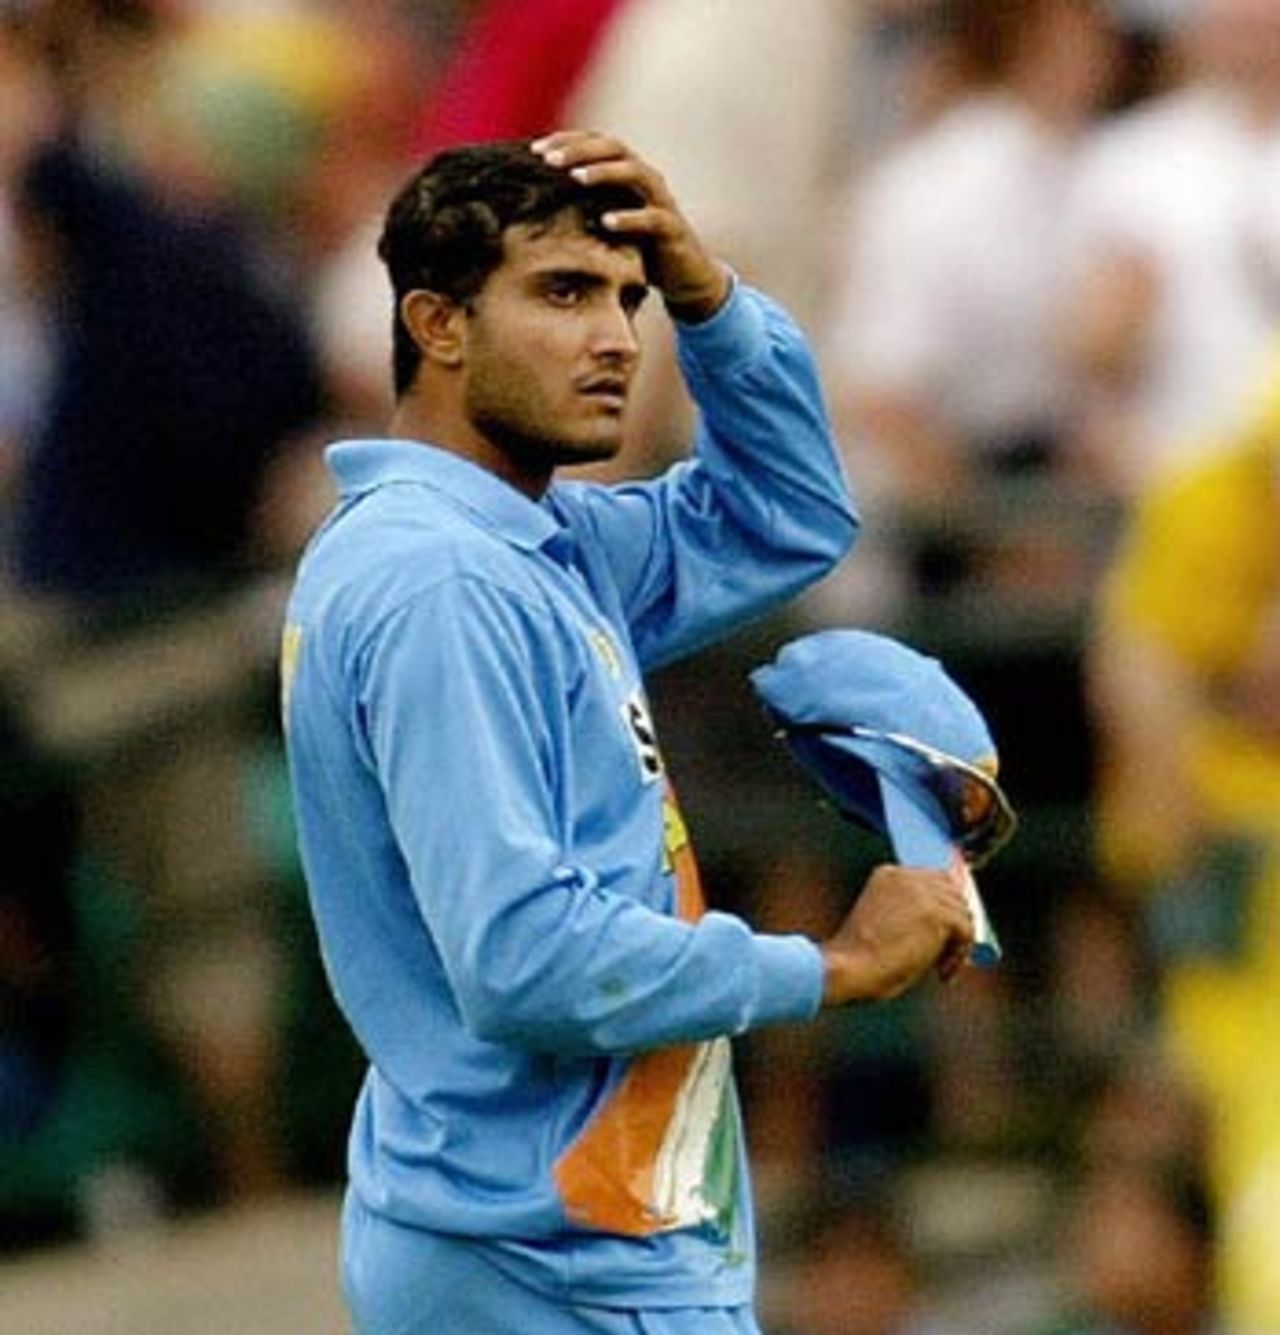 Sourav Ganguly scratched his head, wondering what he could do, Australia v India, VB Series, 2nd final, Sydney, February 8, 2004